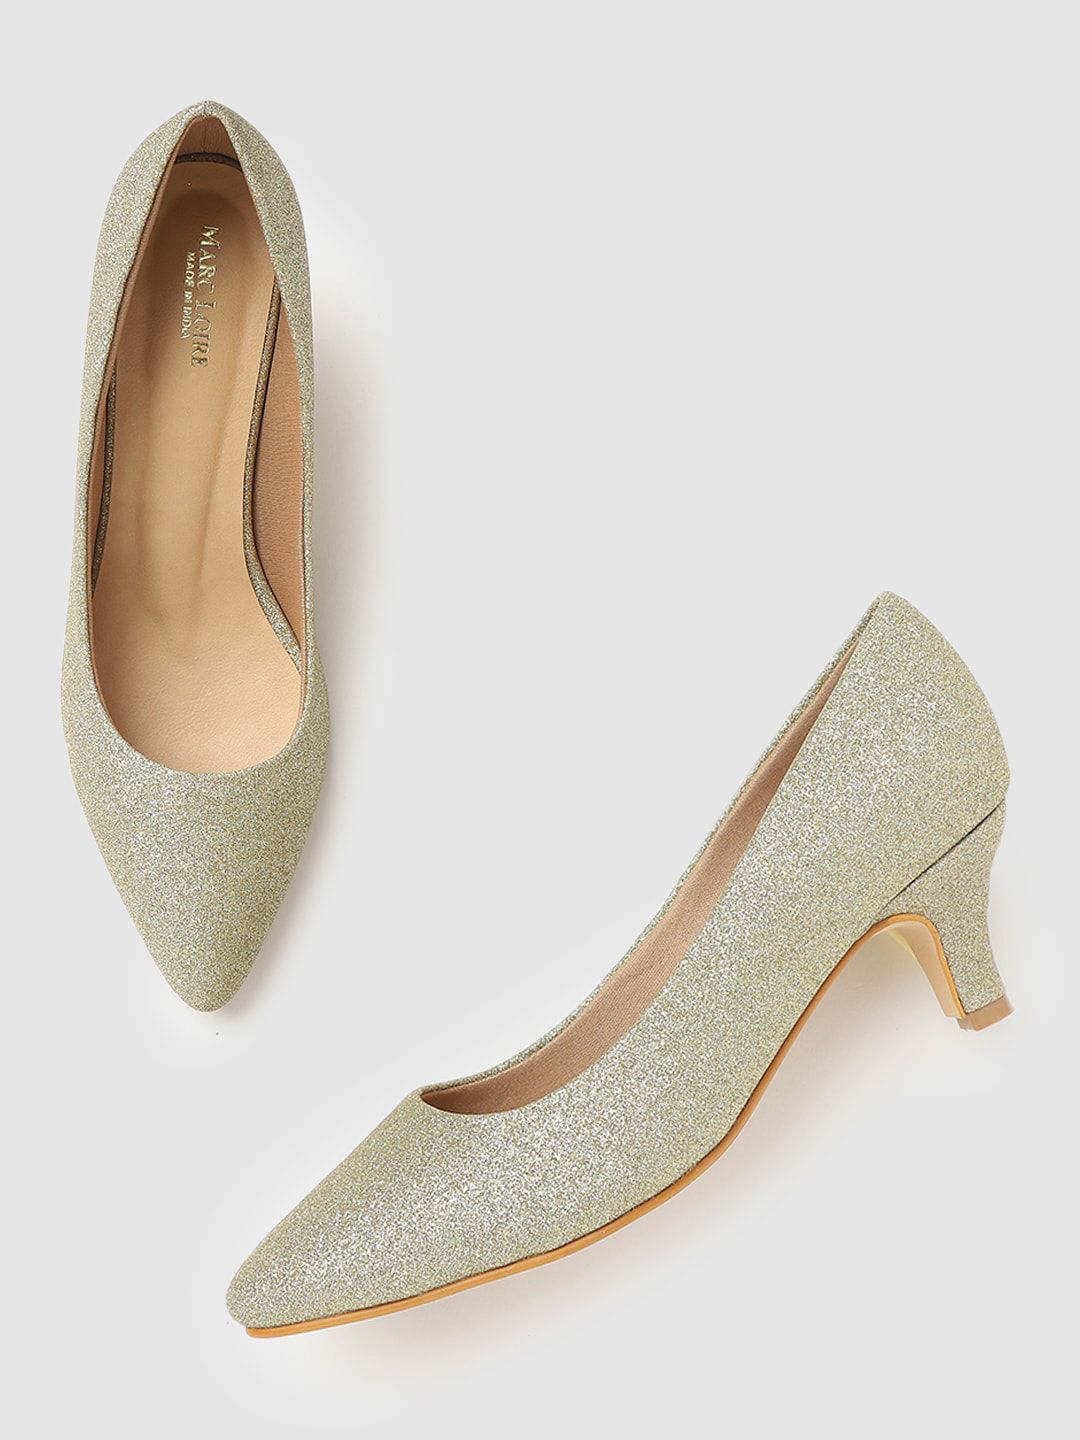 Marc Loire Women Gold-Toned Embellished PU Kitten Pumps Price in India